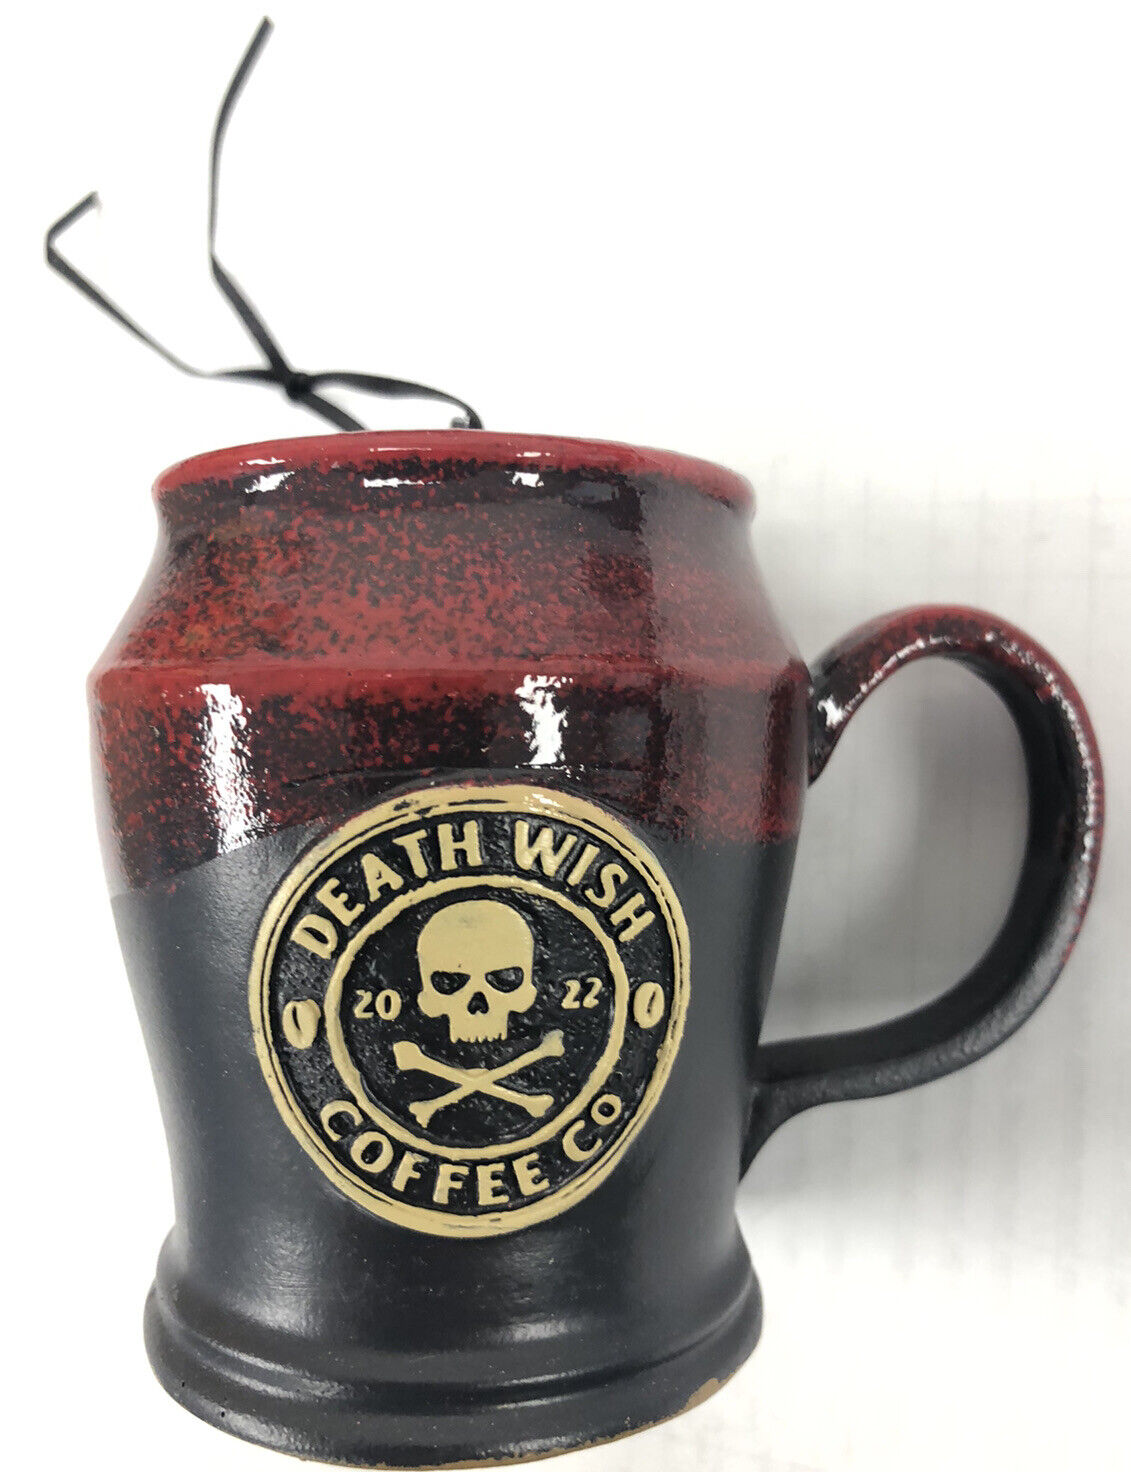 2022 Death Wish Coffee Christmas Ornament Mug 51/1000 New In Box. Low Number